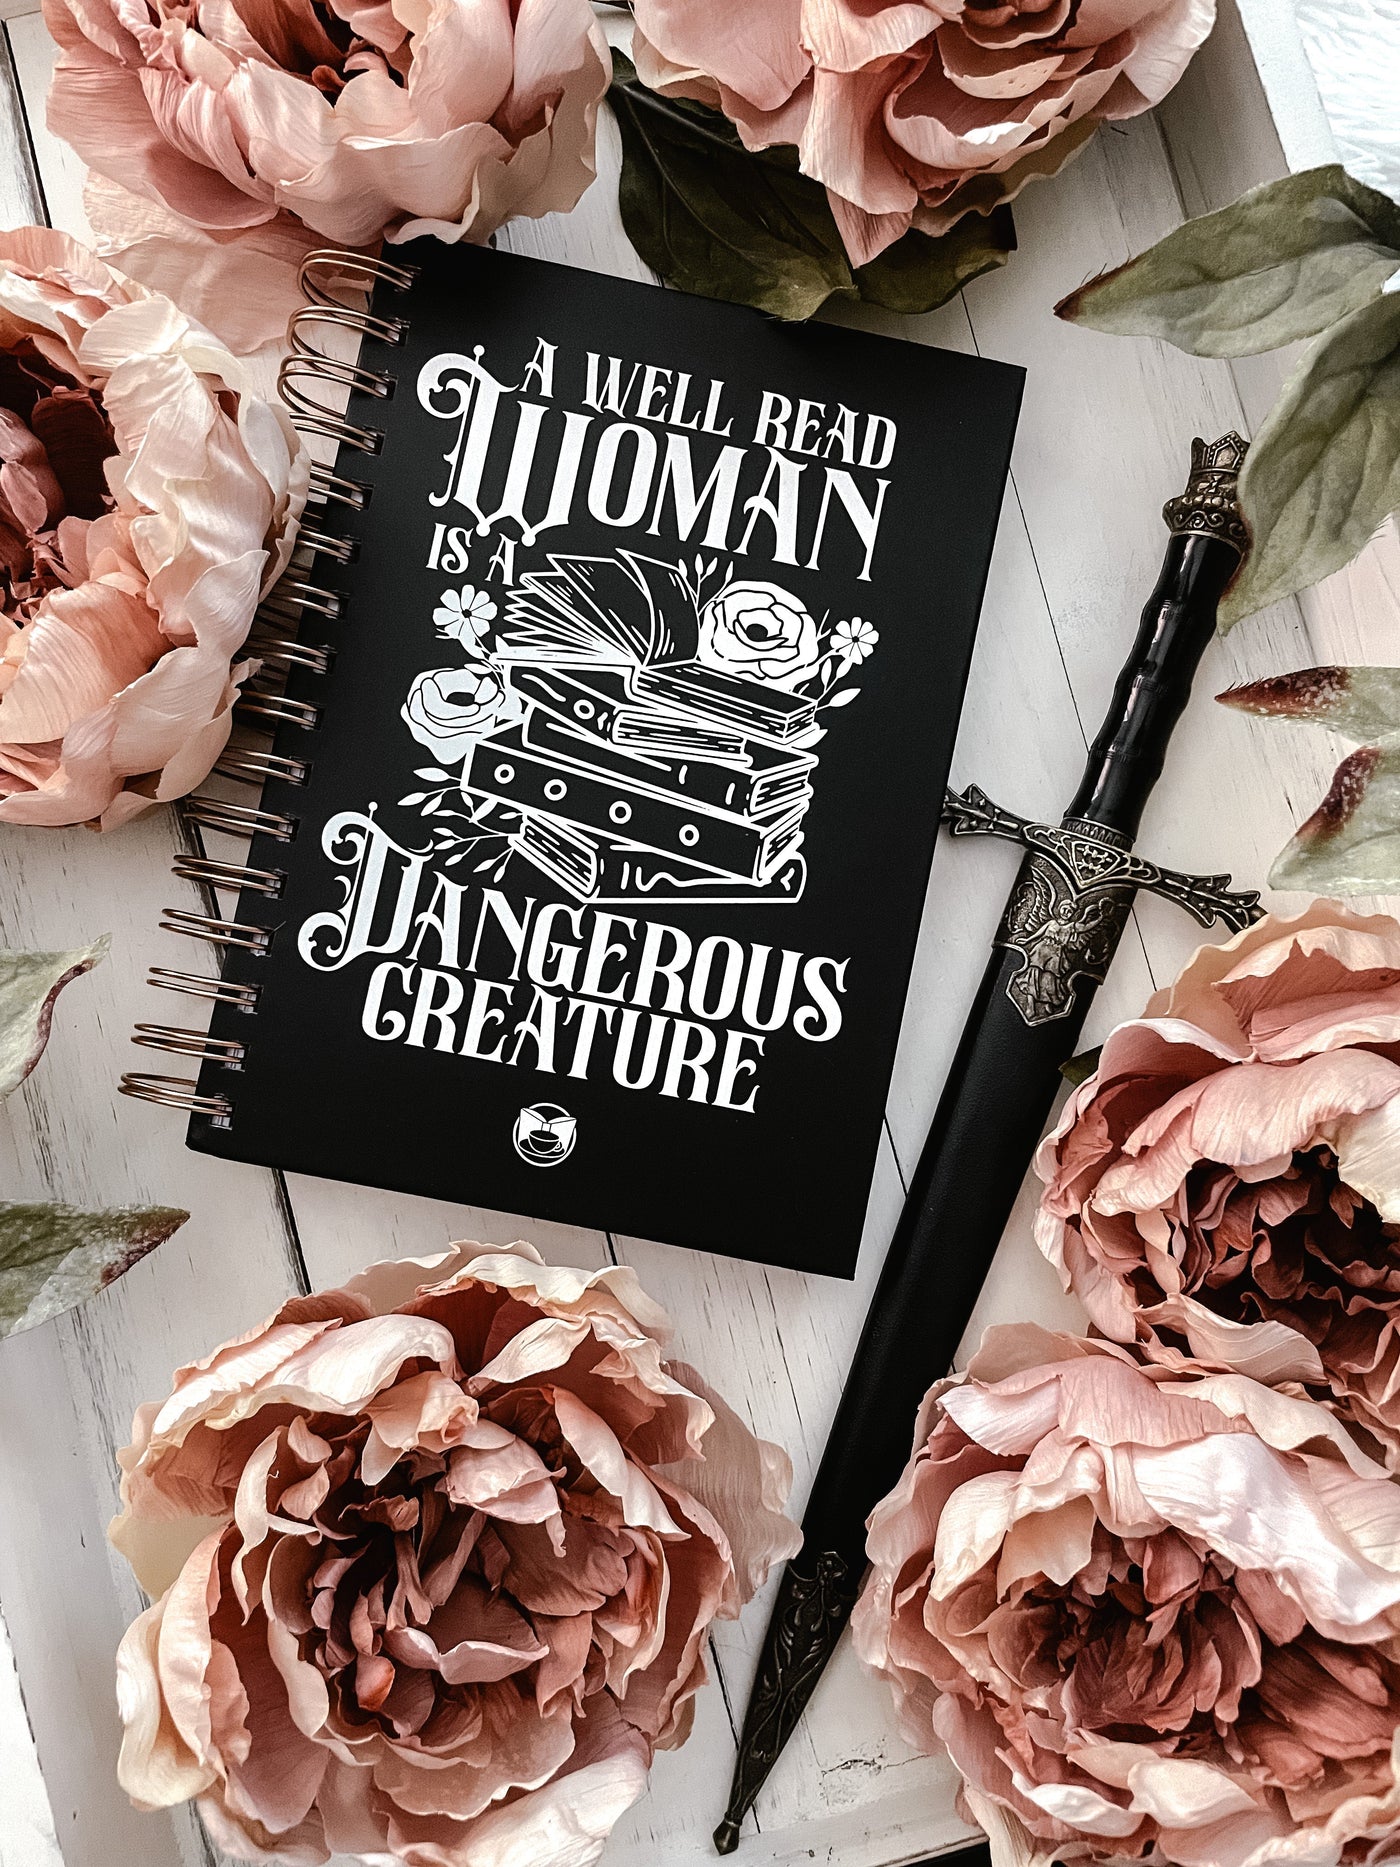 INDIES INVADE PHILLY PRE-ORDER A Well Read Woman Hard Back Notebook